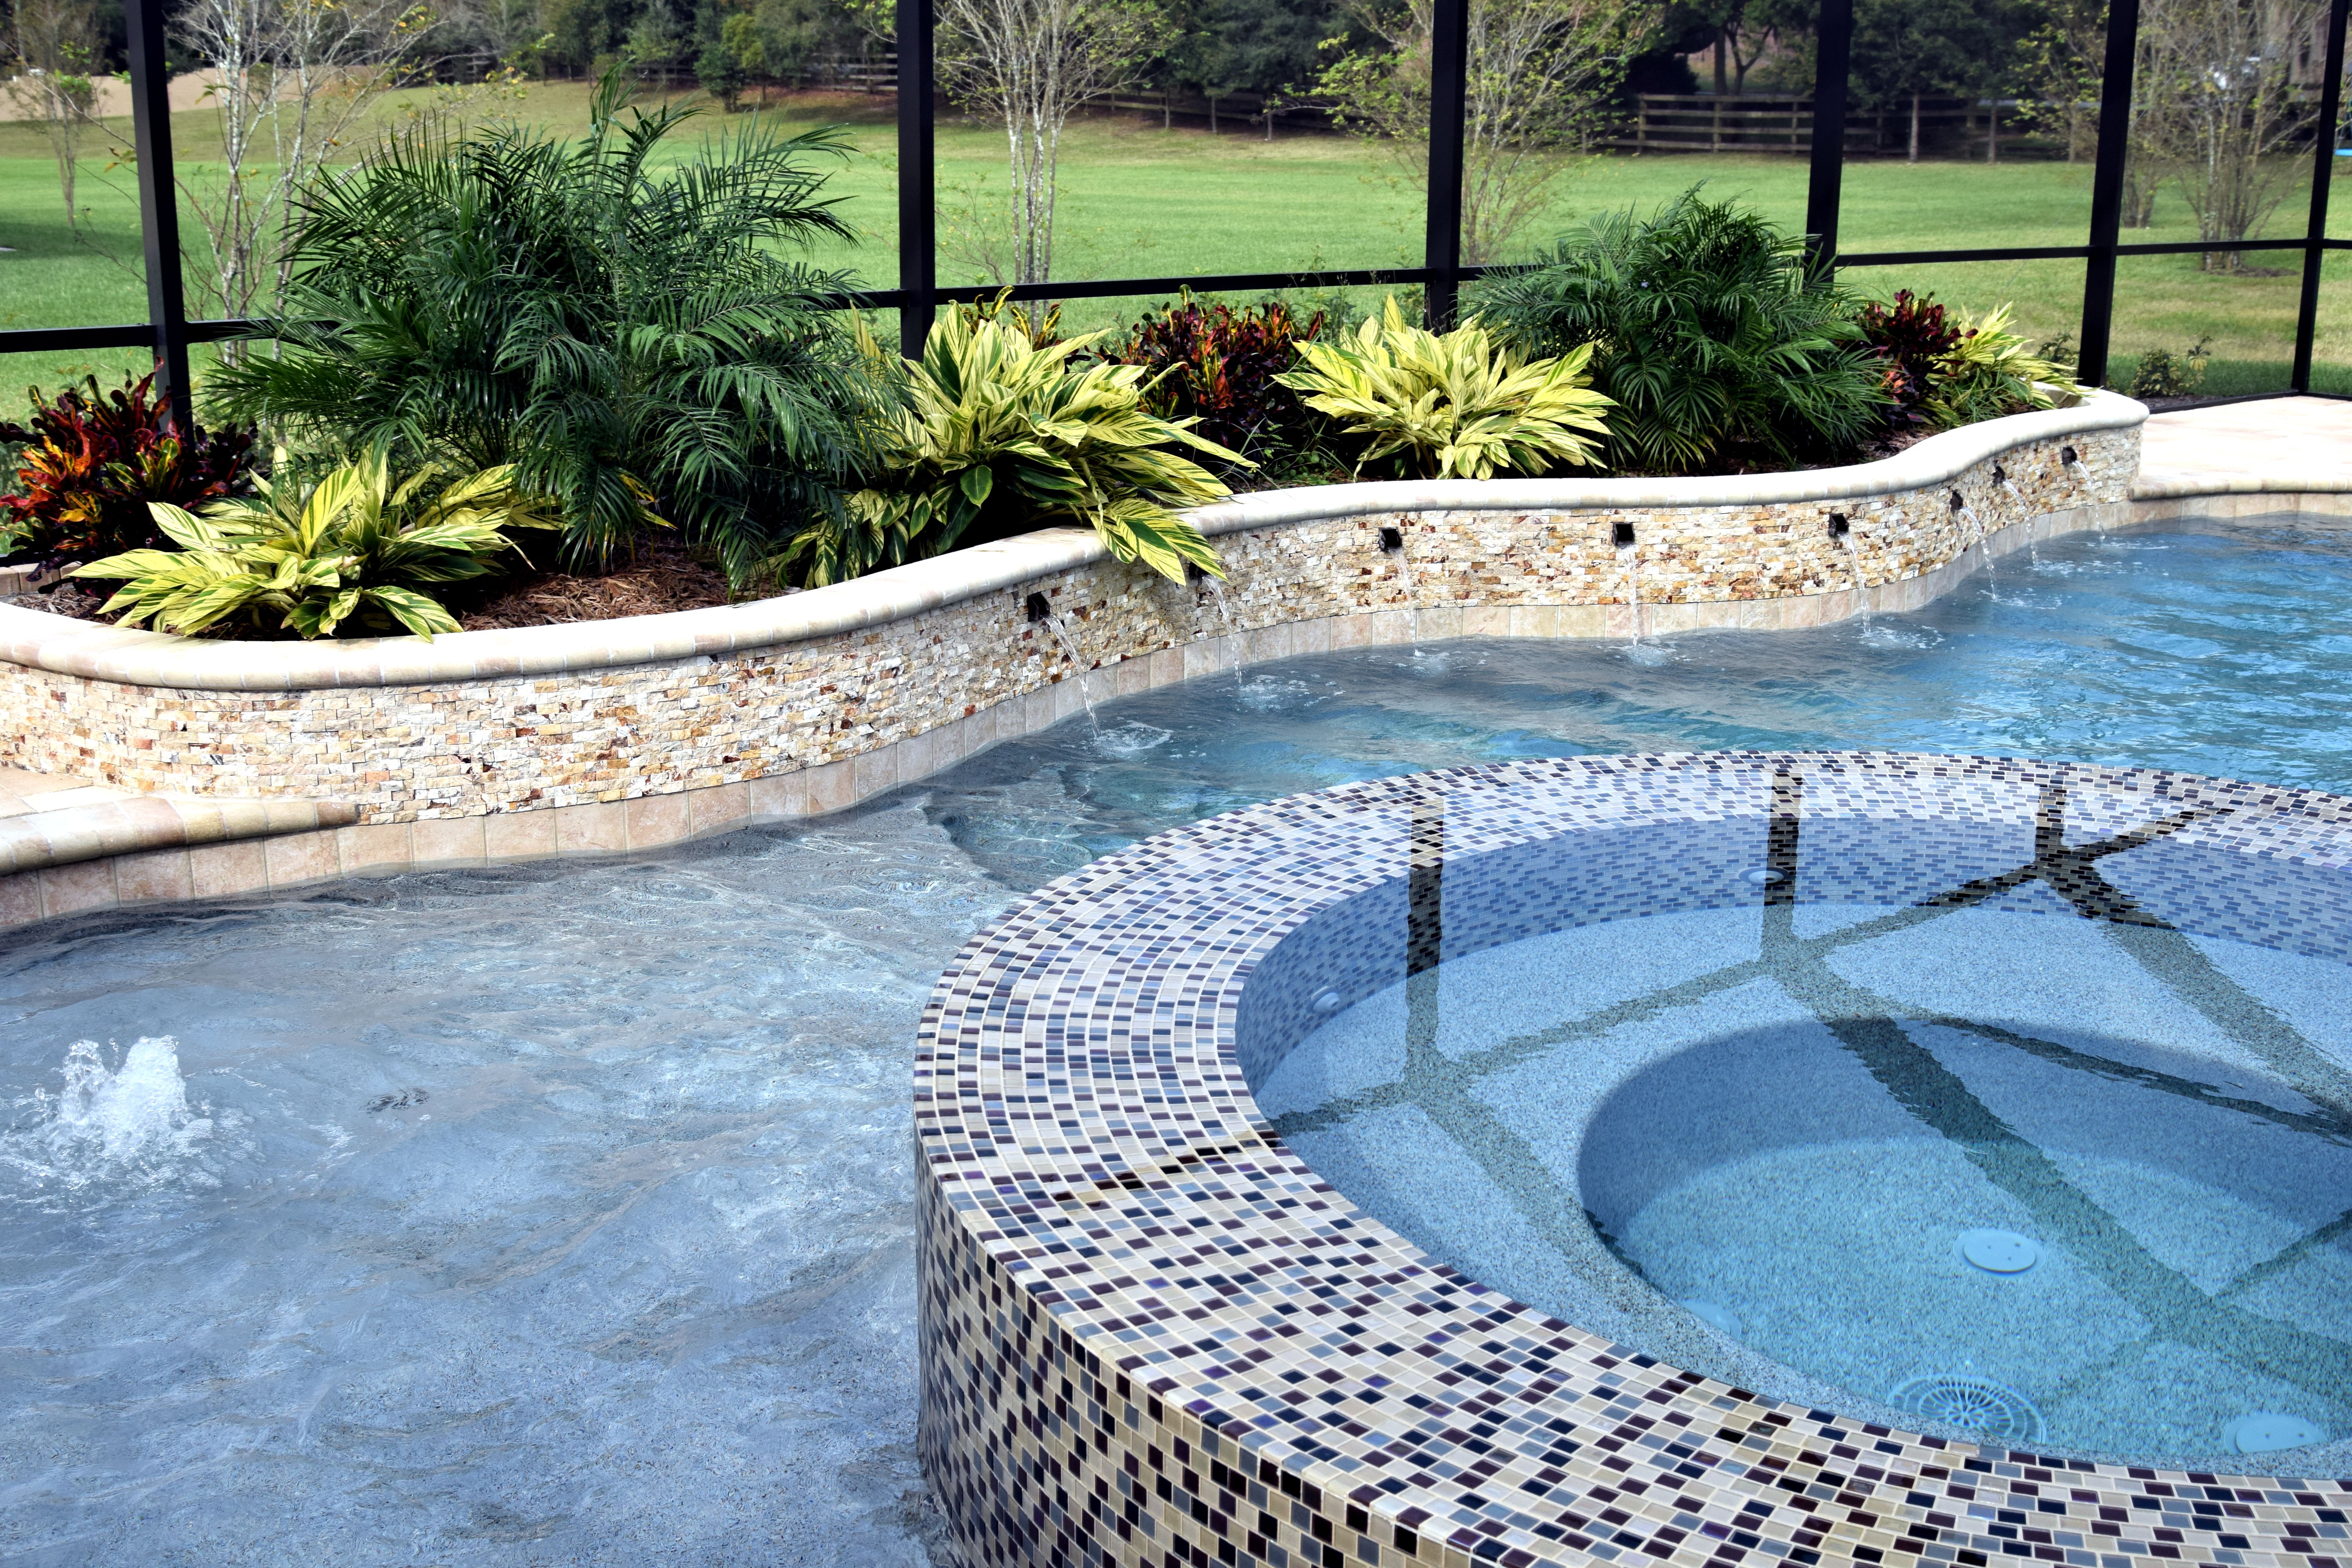 Westchase Pool builder, Contractor, Remodeling, Outdoor Kitchens